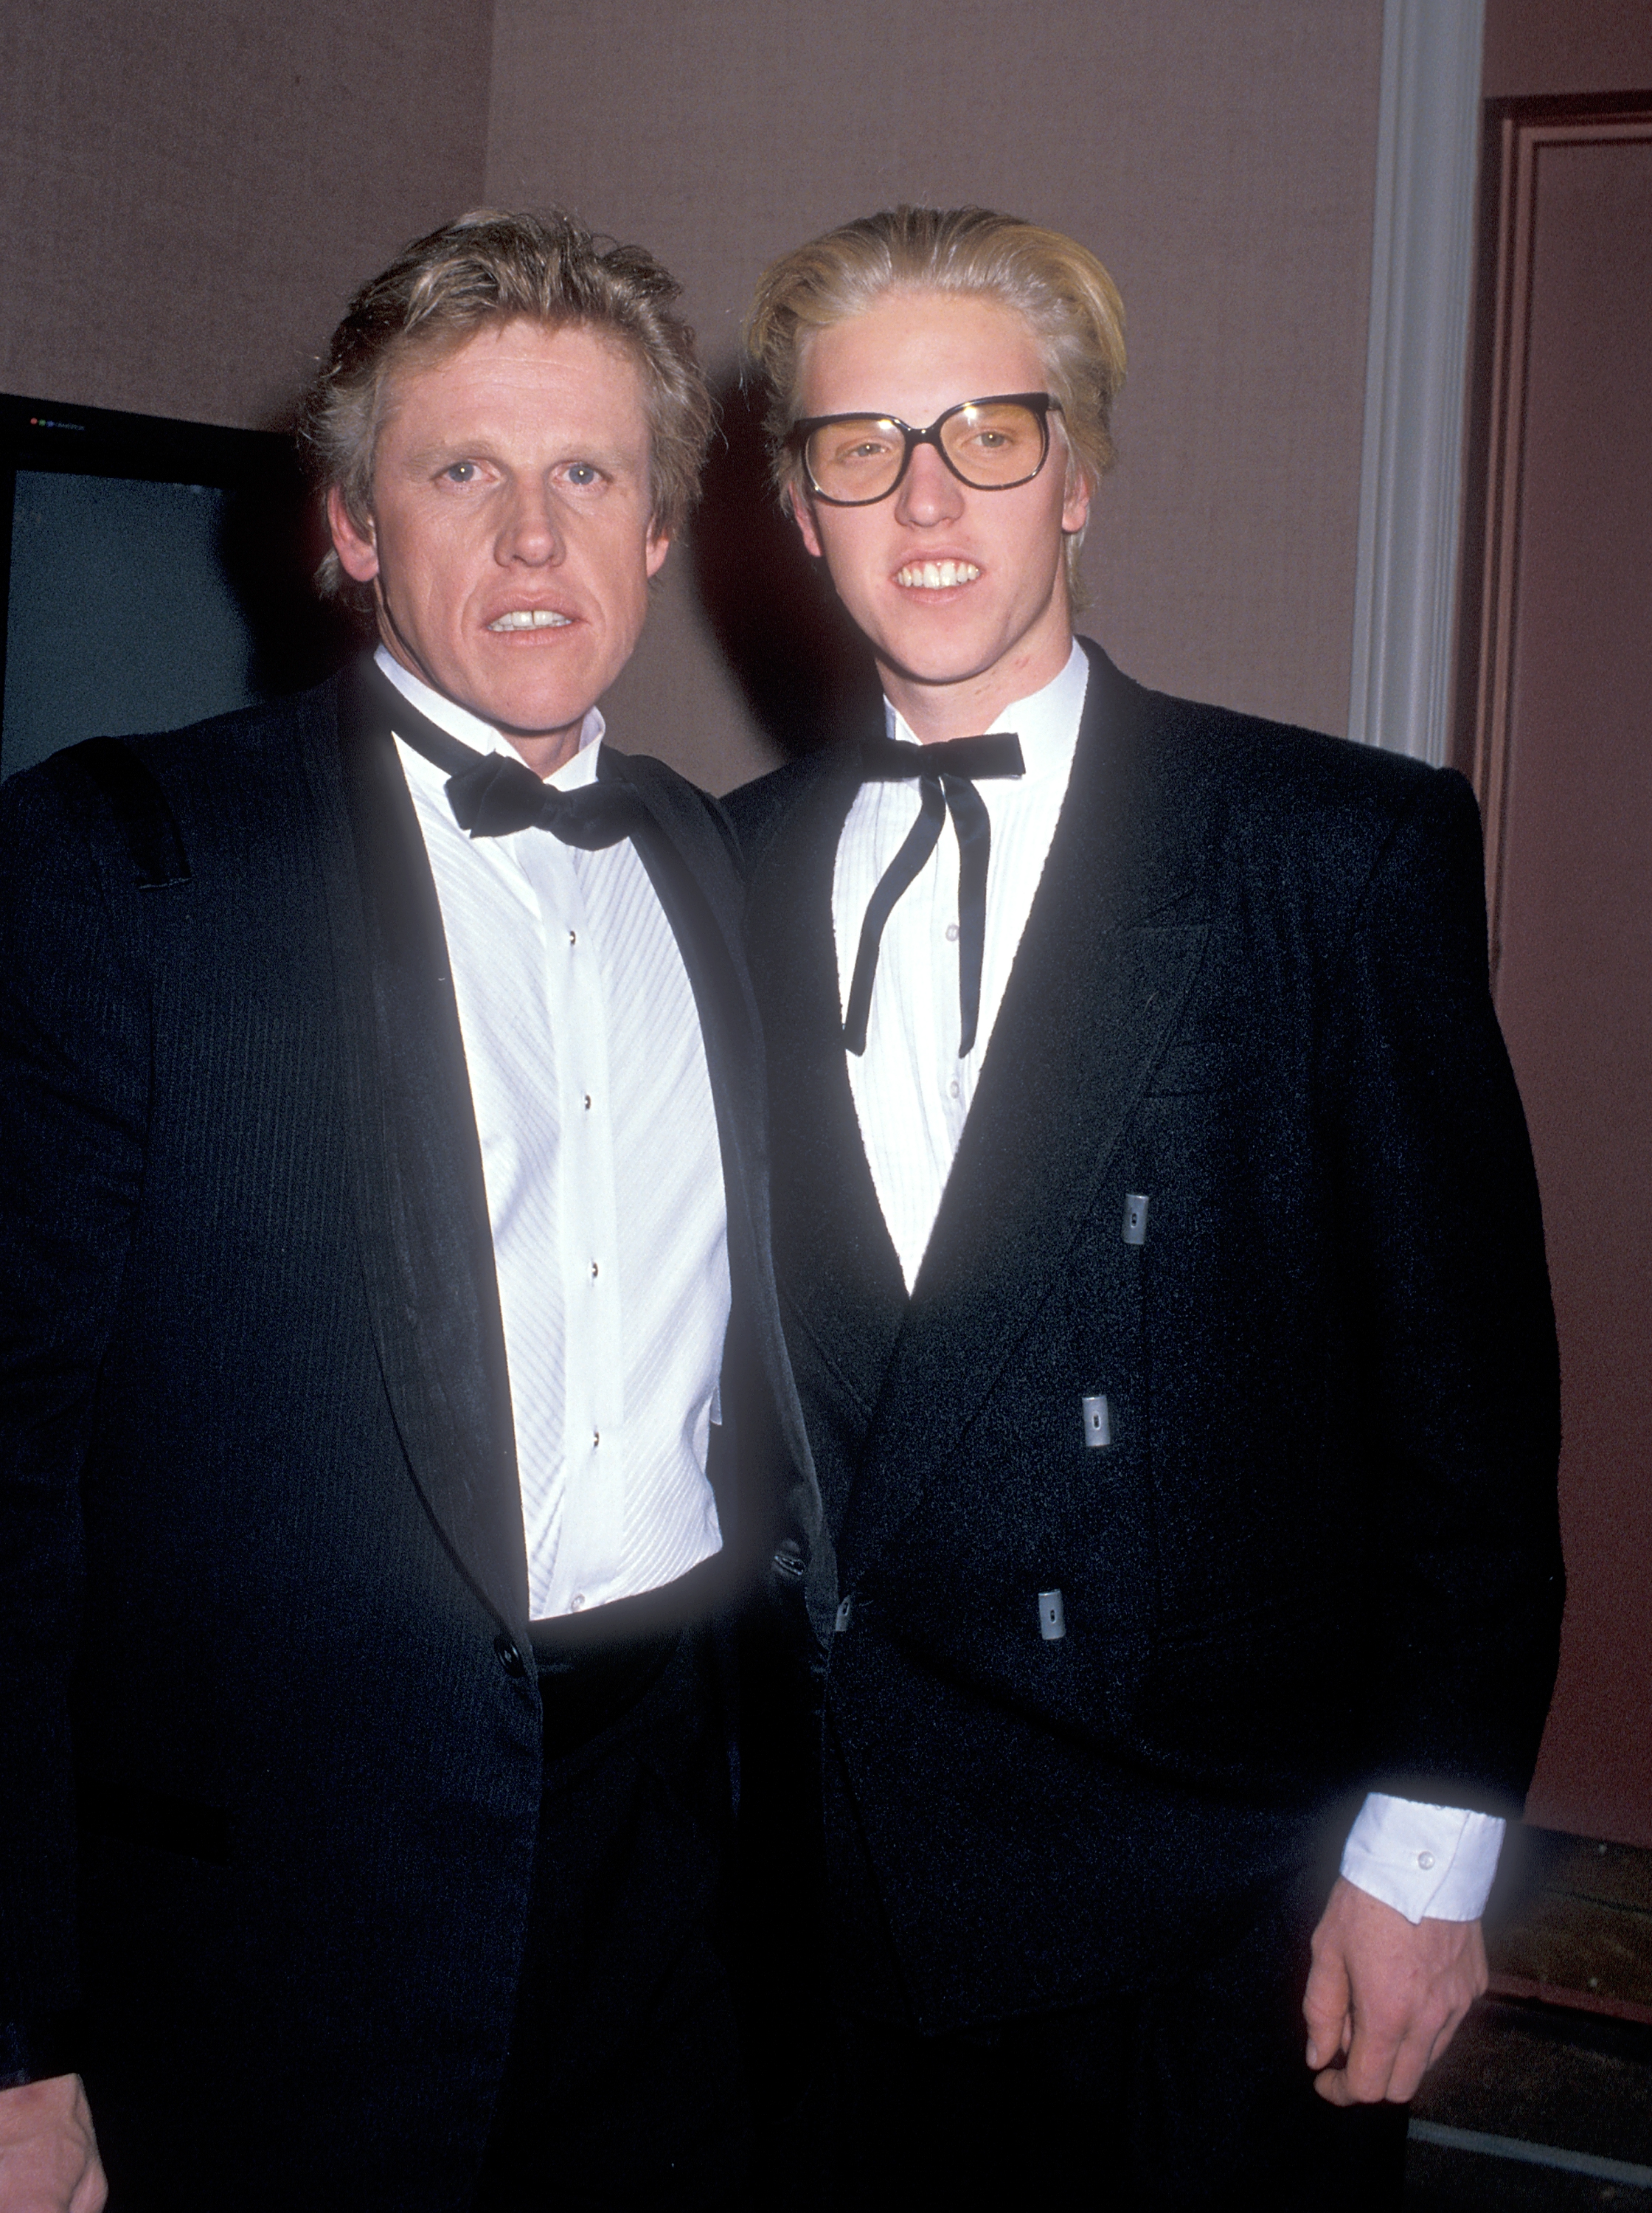 Gary Busey and his son Jake Busey attend the 47th Annual Golden Globe Awards at Beverly Hilton Hotel on January 20, 1990 in Beverly Hills, California | Source: Getty Images